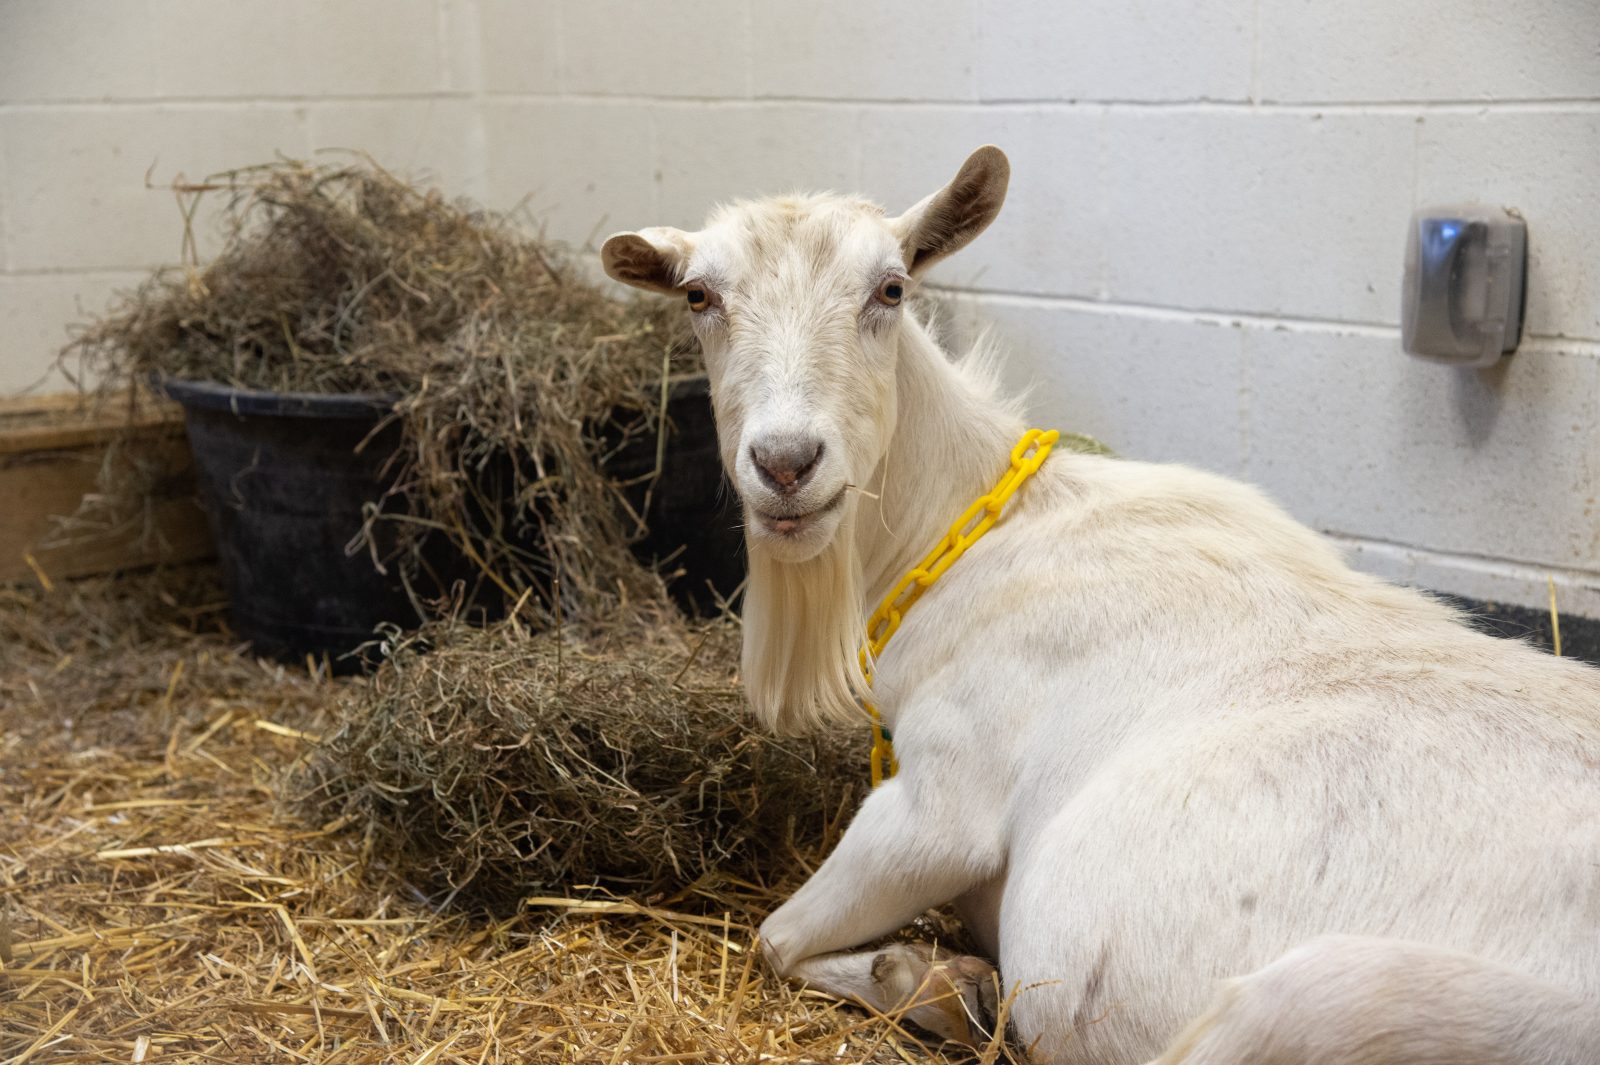 Shirley goat shortly after her rescue